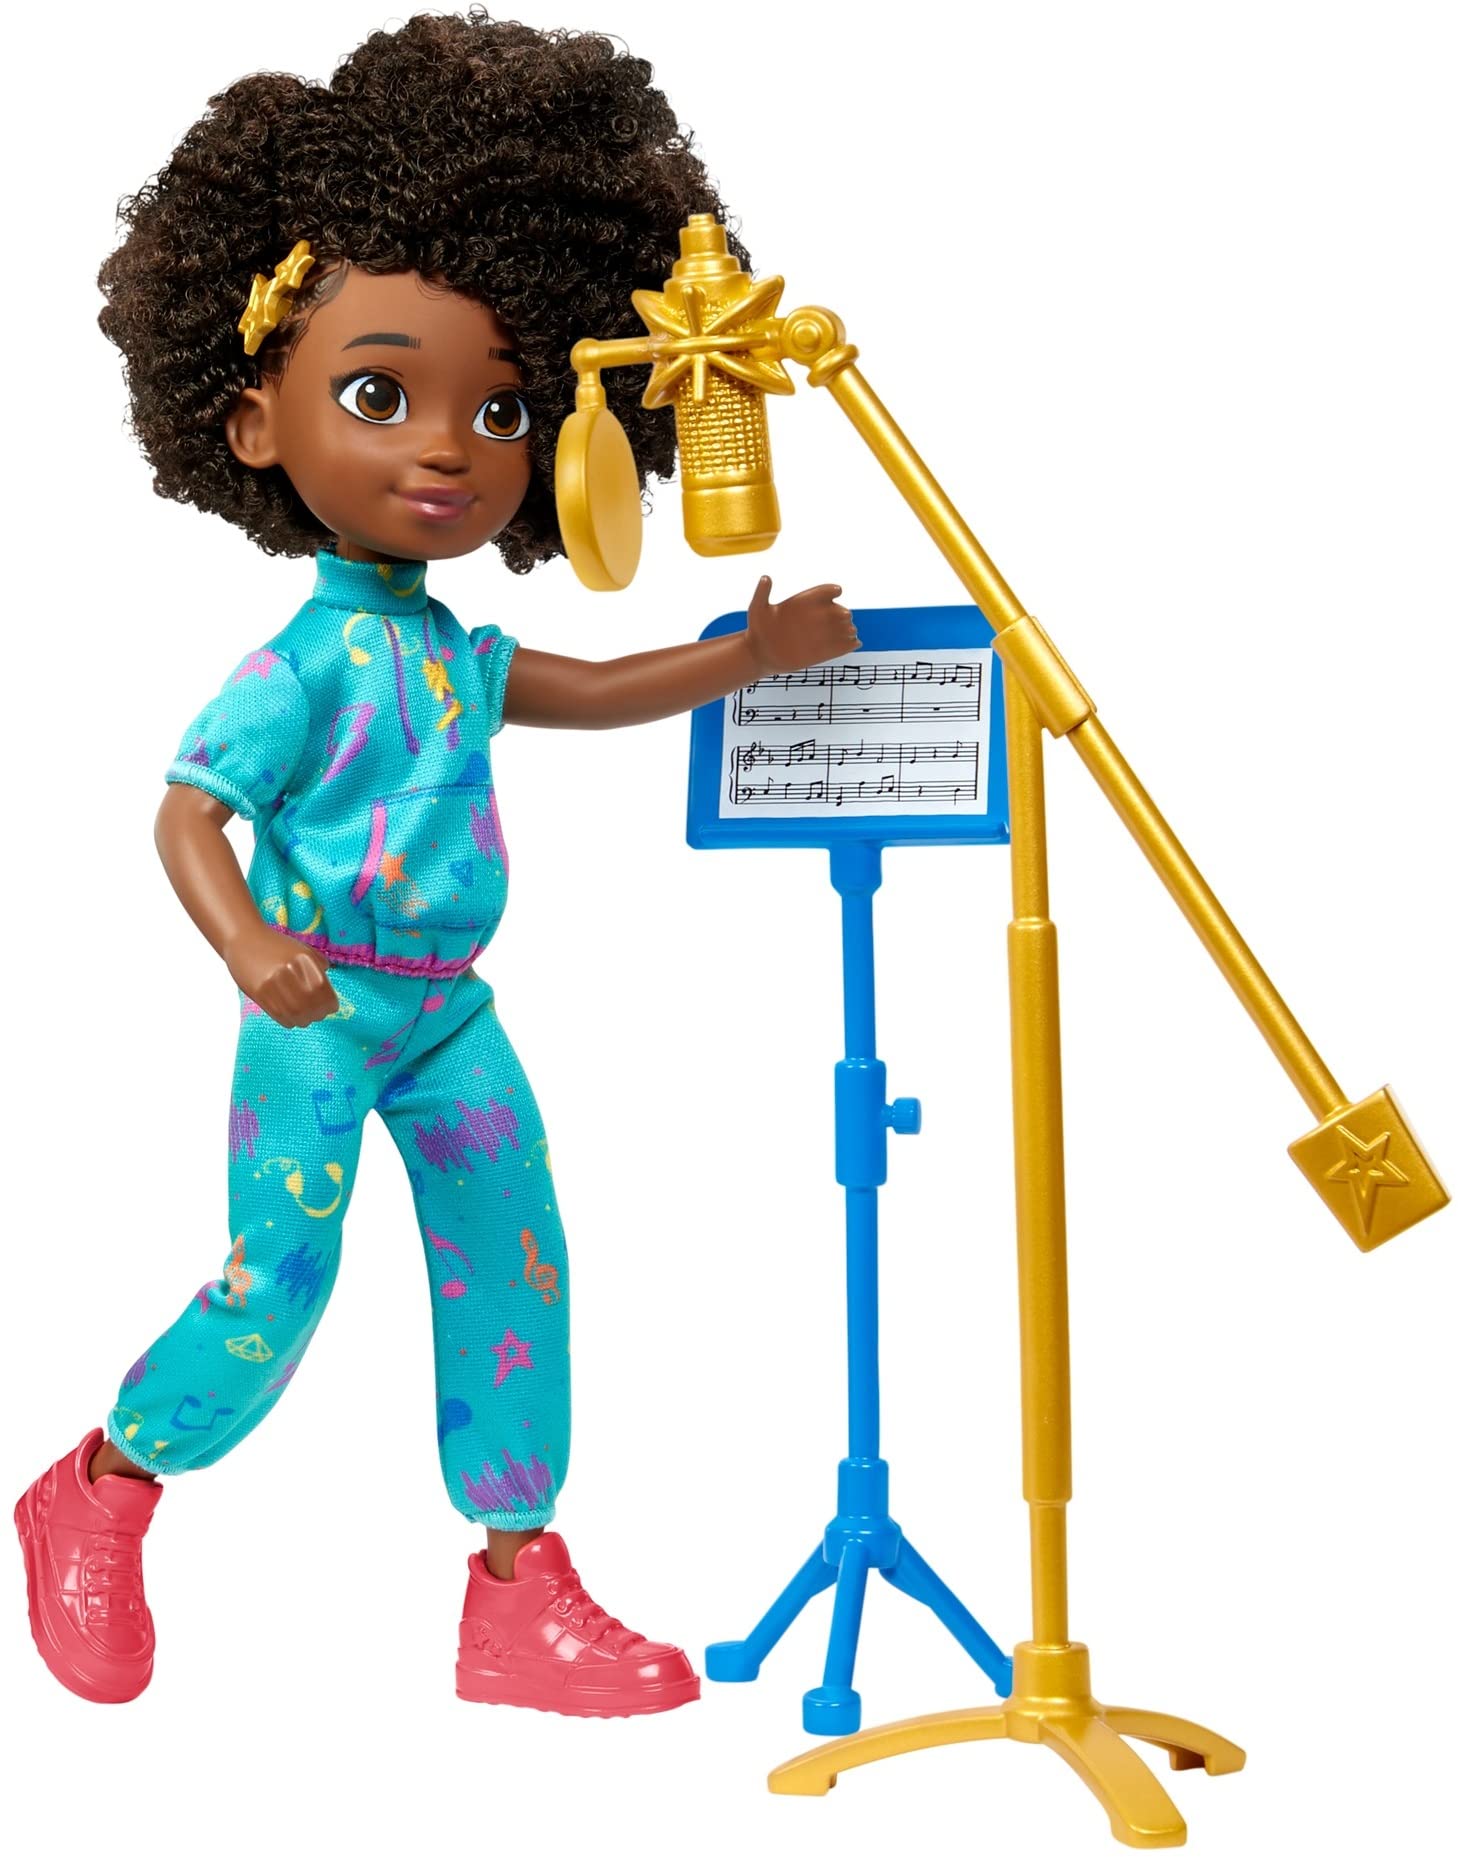 Karma's World Recording Studio Toy Playset with Karma Doll & Accessories, Includes Collectible Record